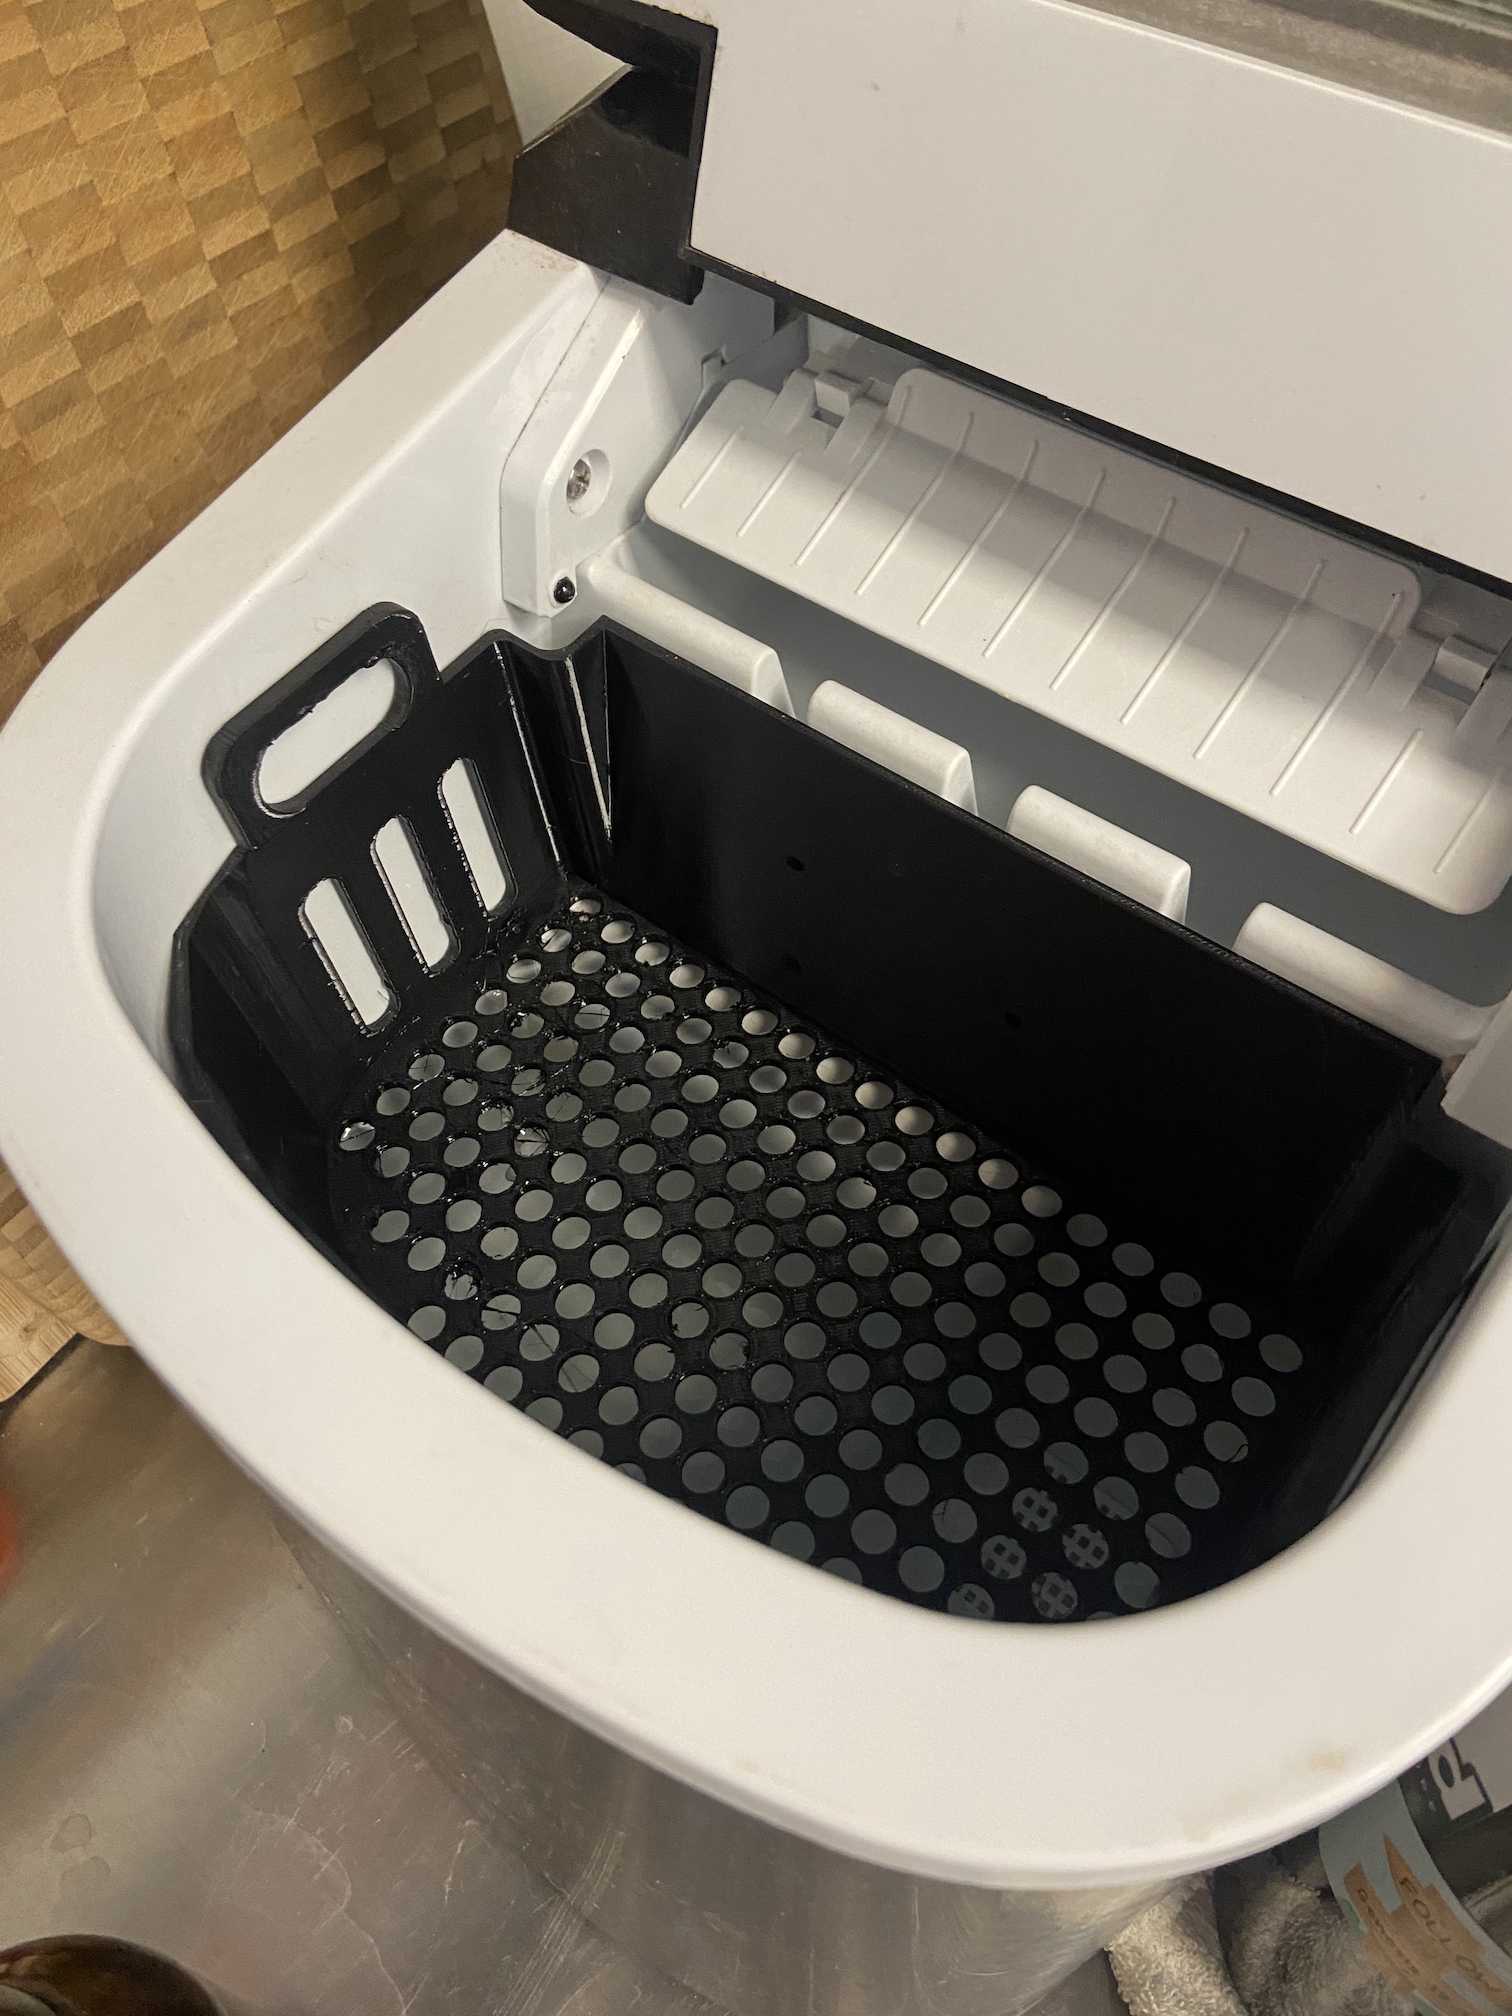 Magic Chef Ice Maker Replacement Basket